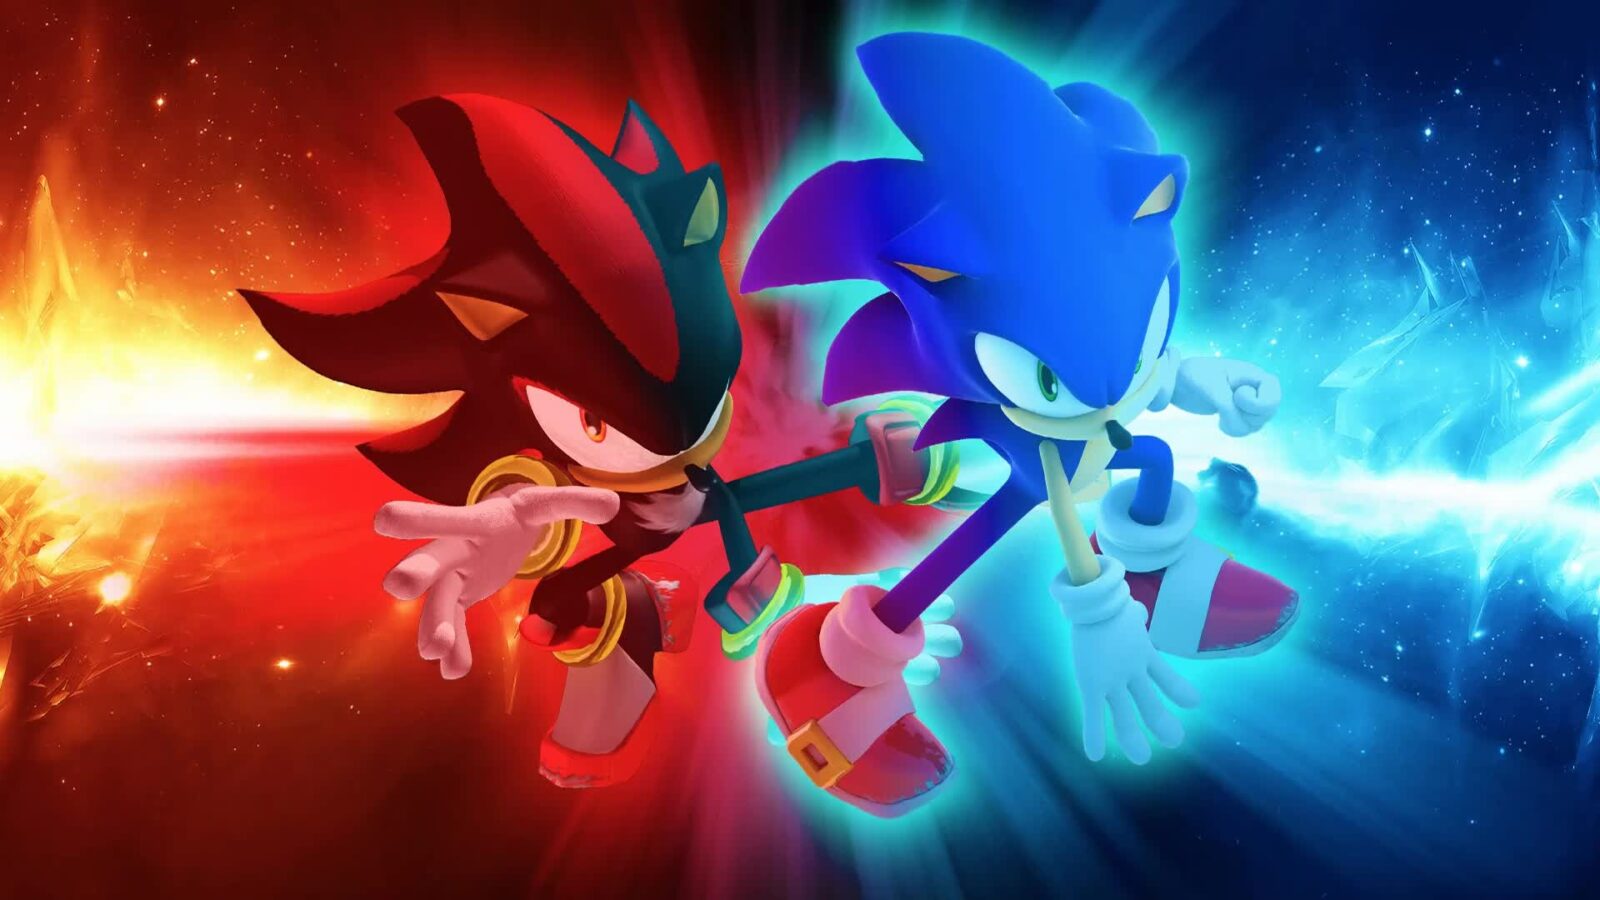 LiveWallpapers4Free.com | Sonic Adventure 2 - Free Animated Live Wallpaper